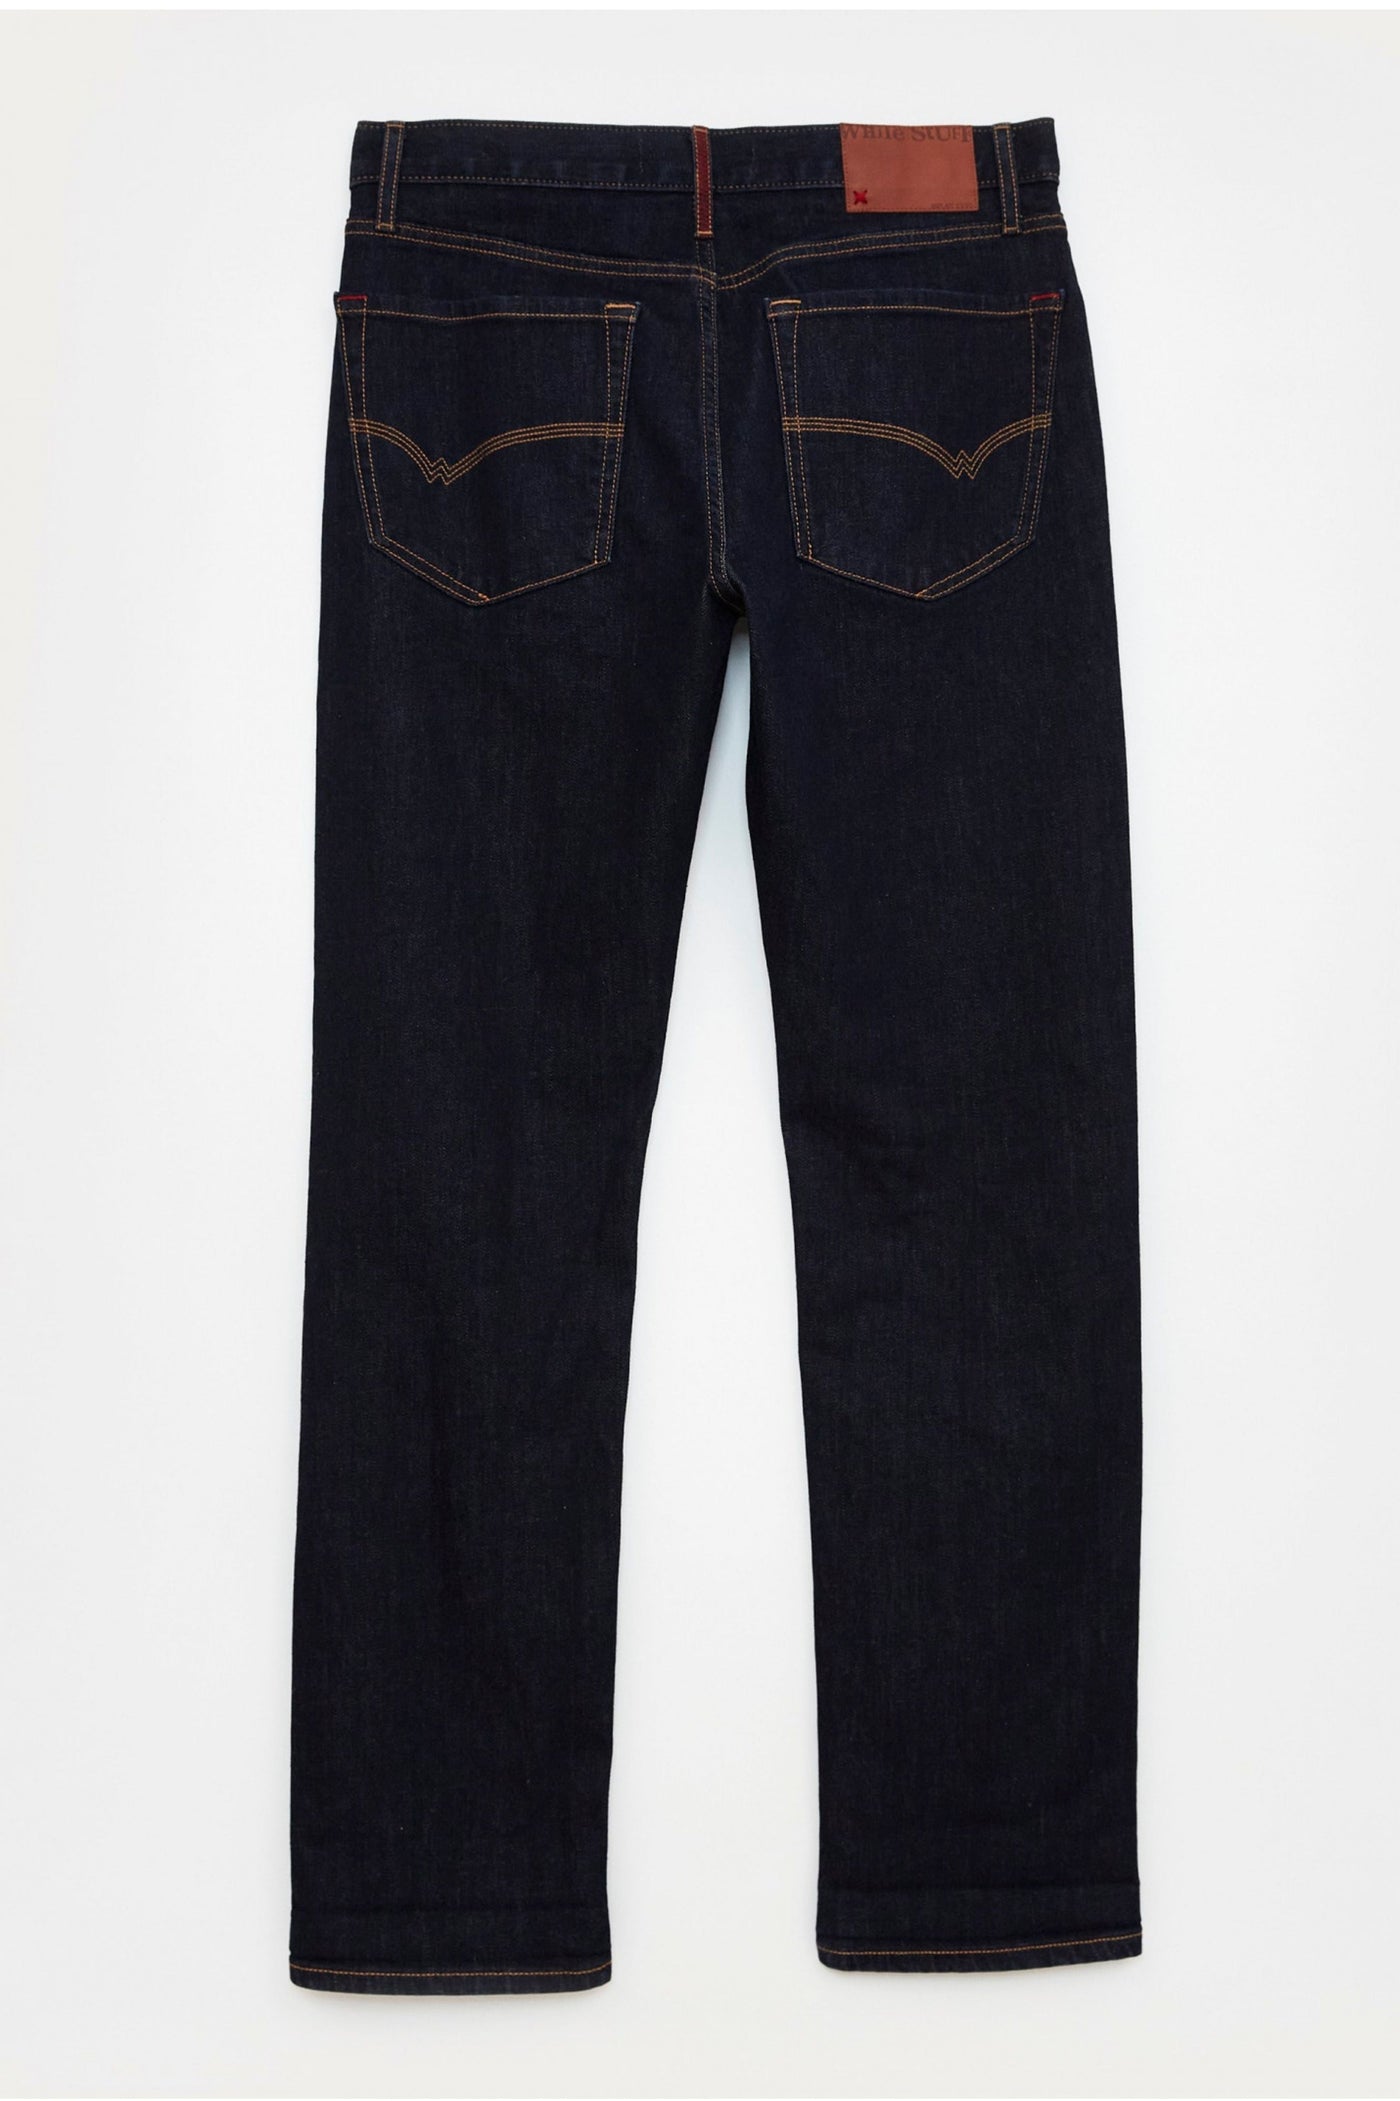 White Stuff Harwood Straight Jeans-Mens-Ohh! By Gum - Shop Sustainable